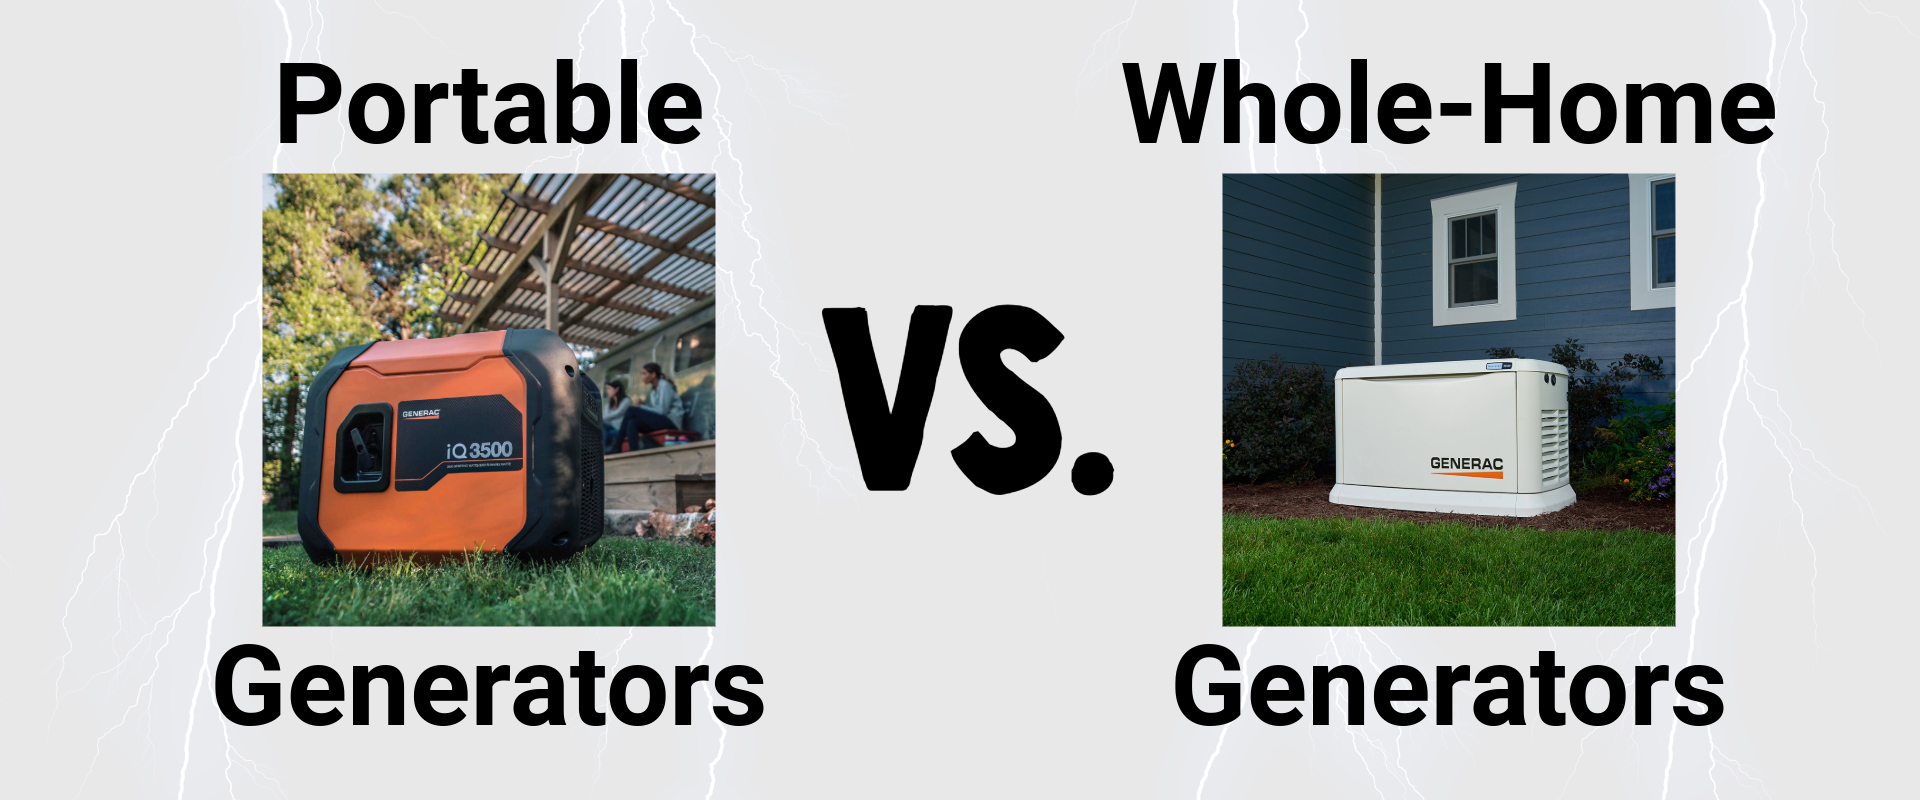 A picture of a portable generator and a picture of a whole-home generator.